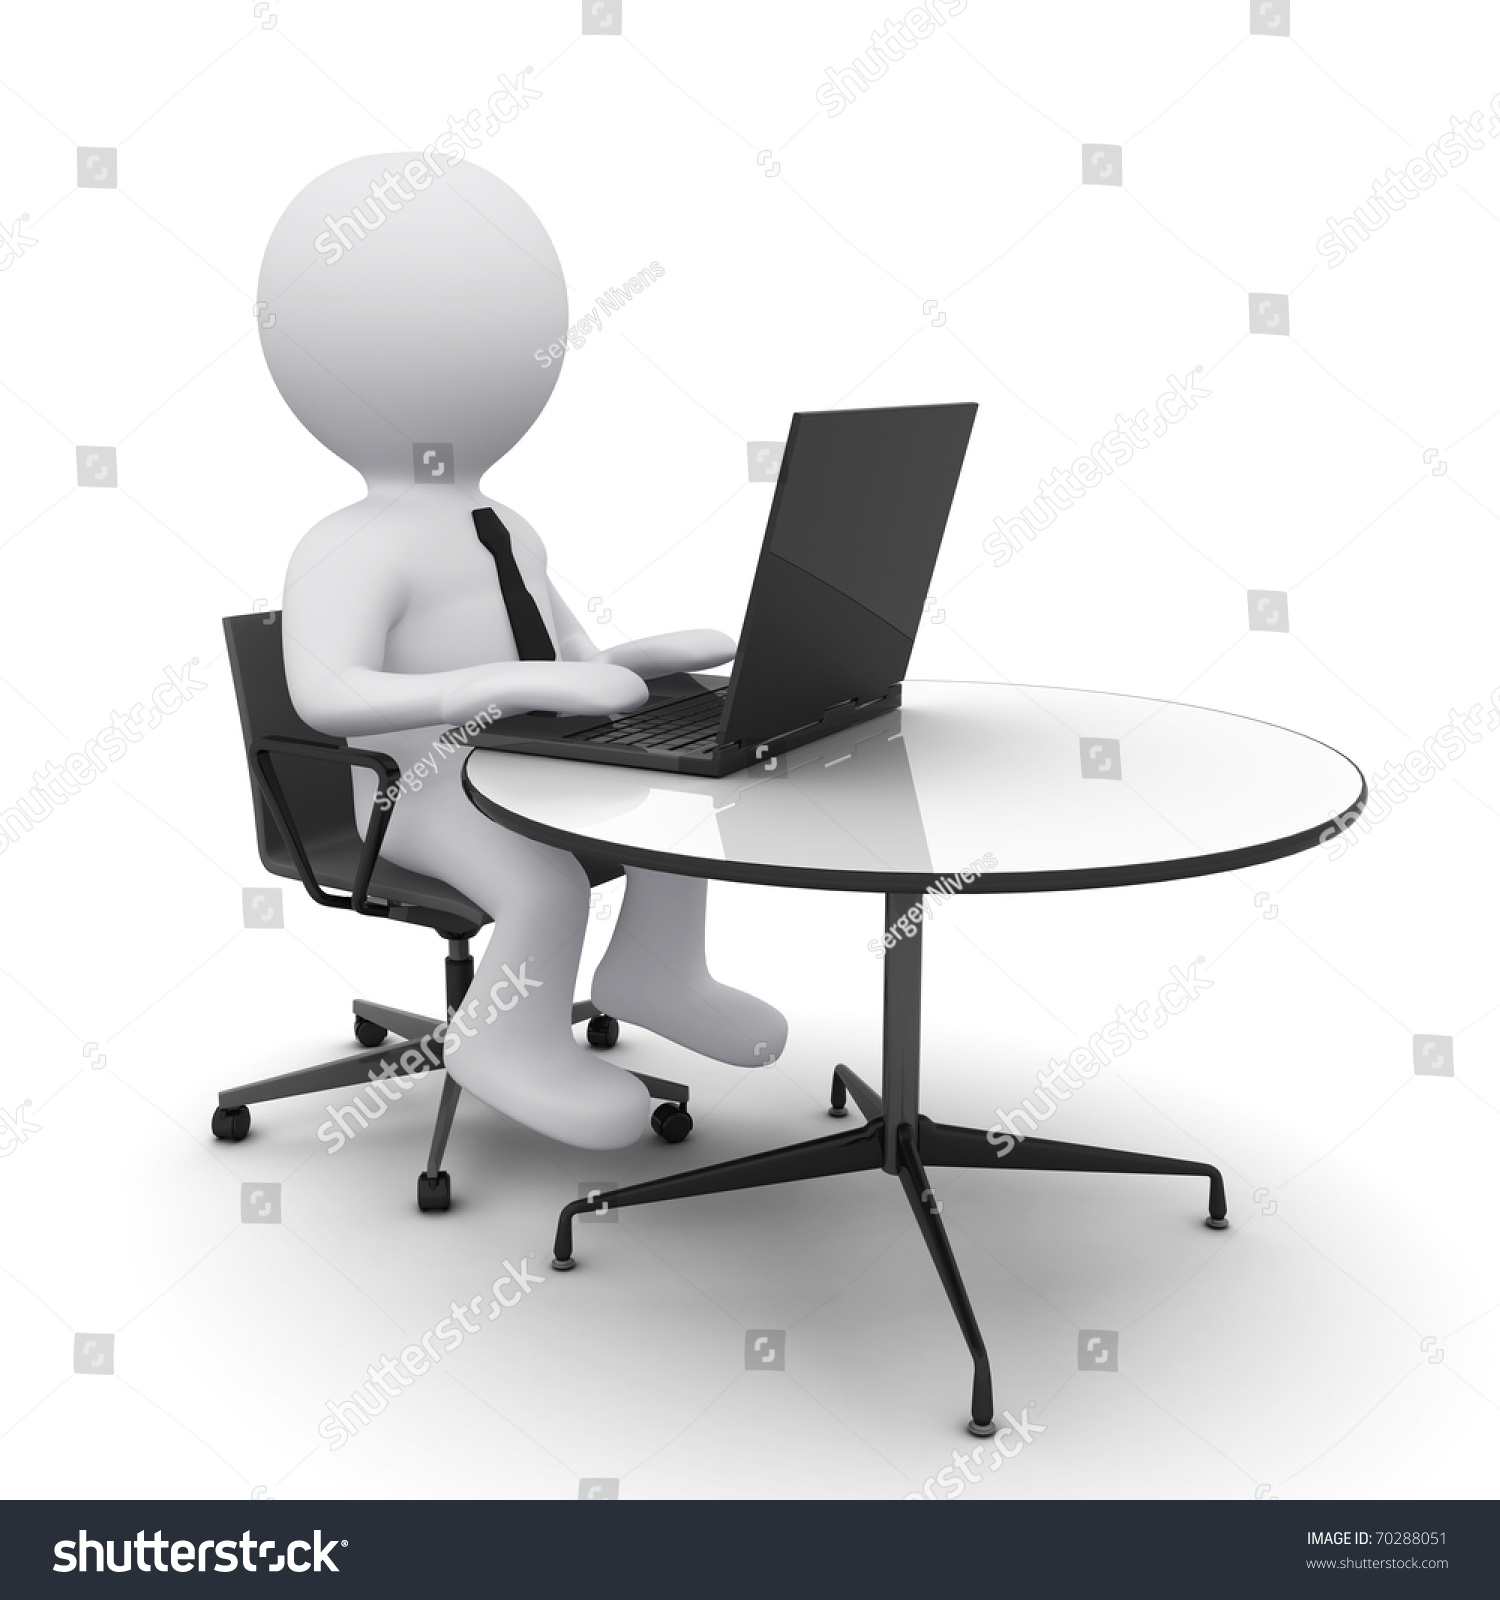 clipart man with laptop - photo #5